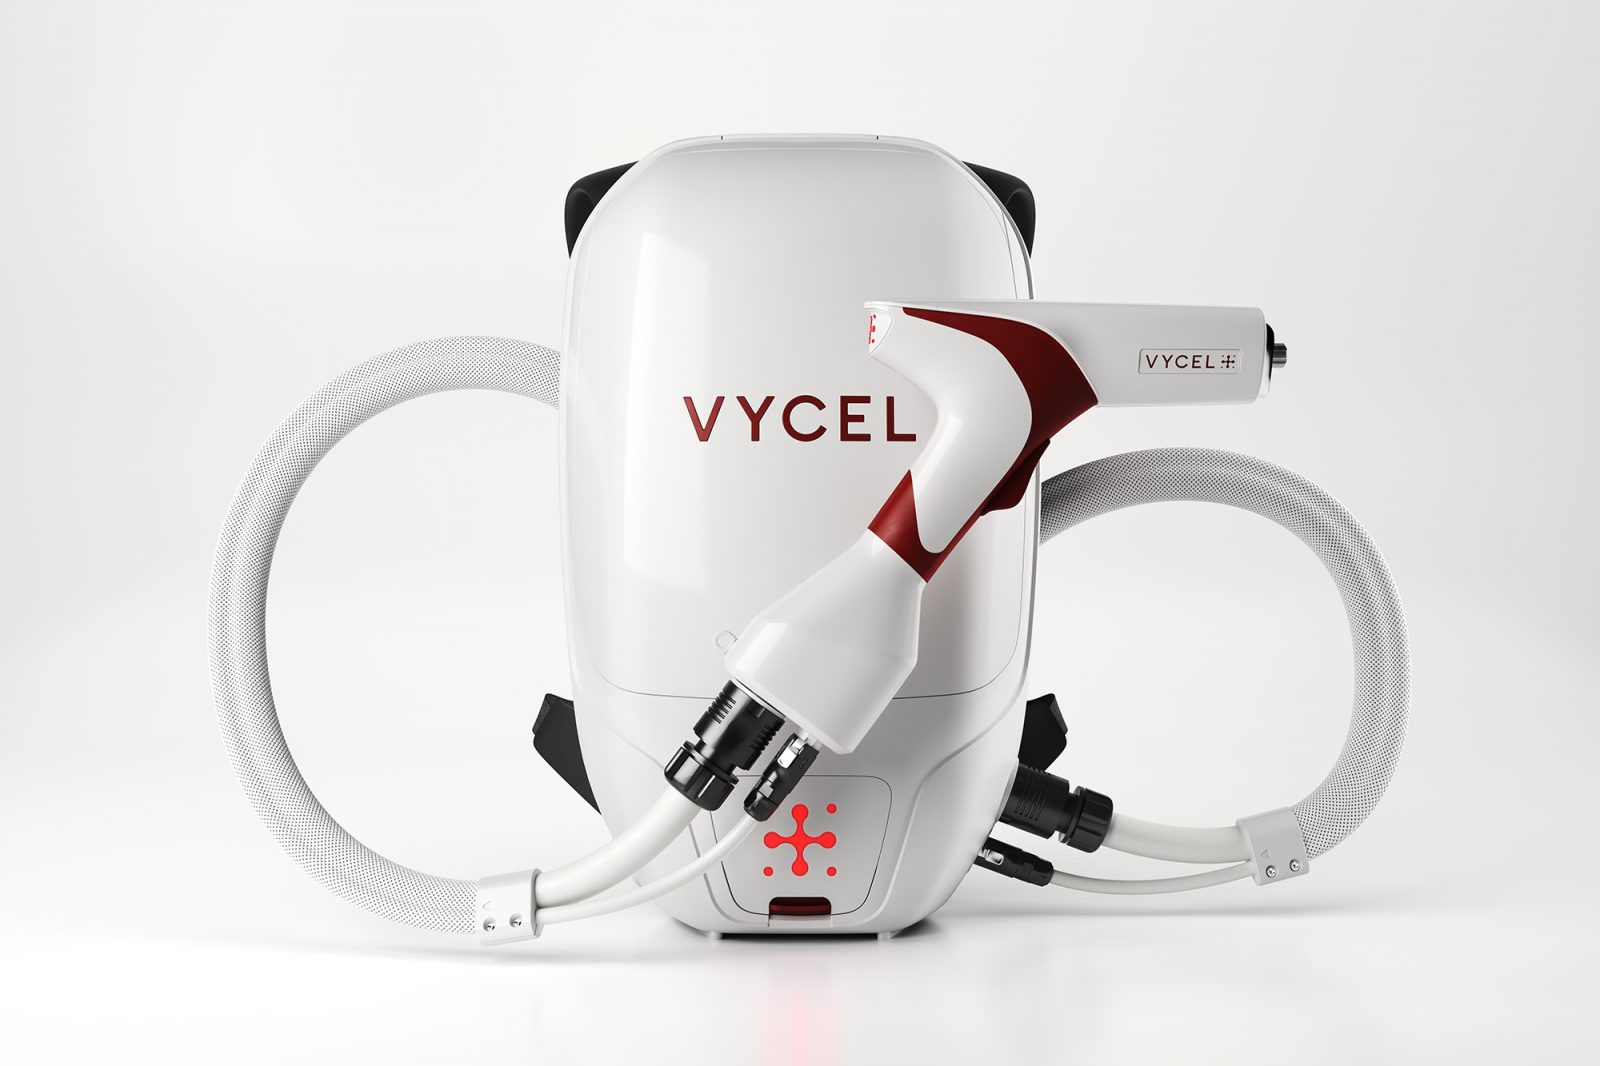 Naming, Branding and Packaging Design for Vycel Has Been Created by Dd London